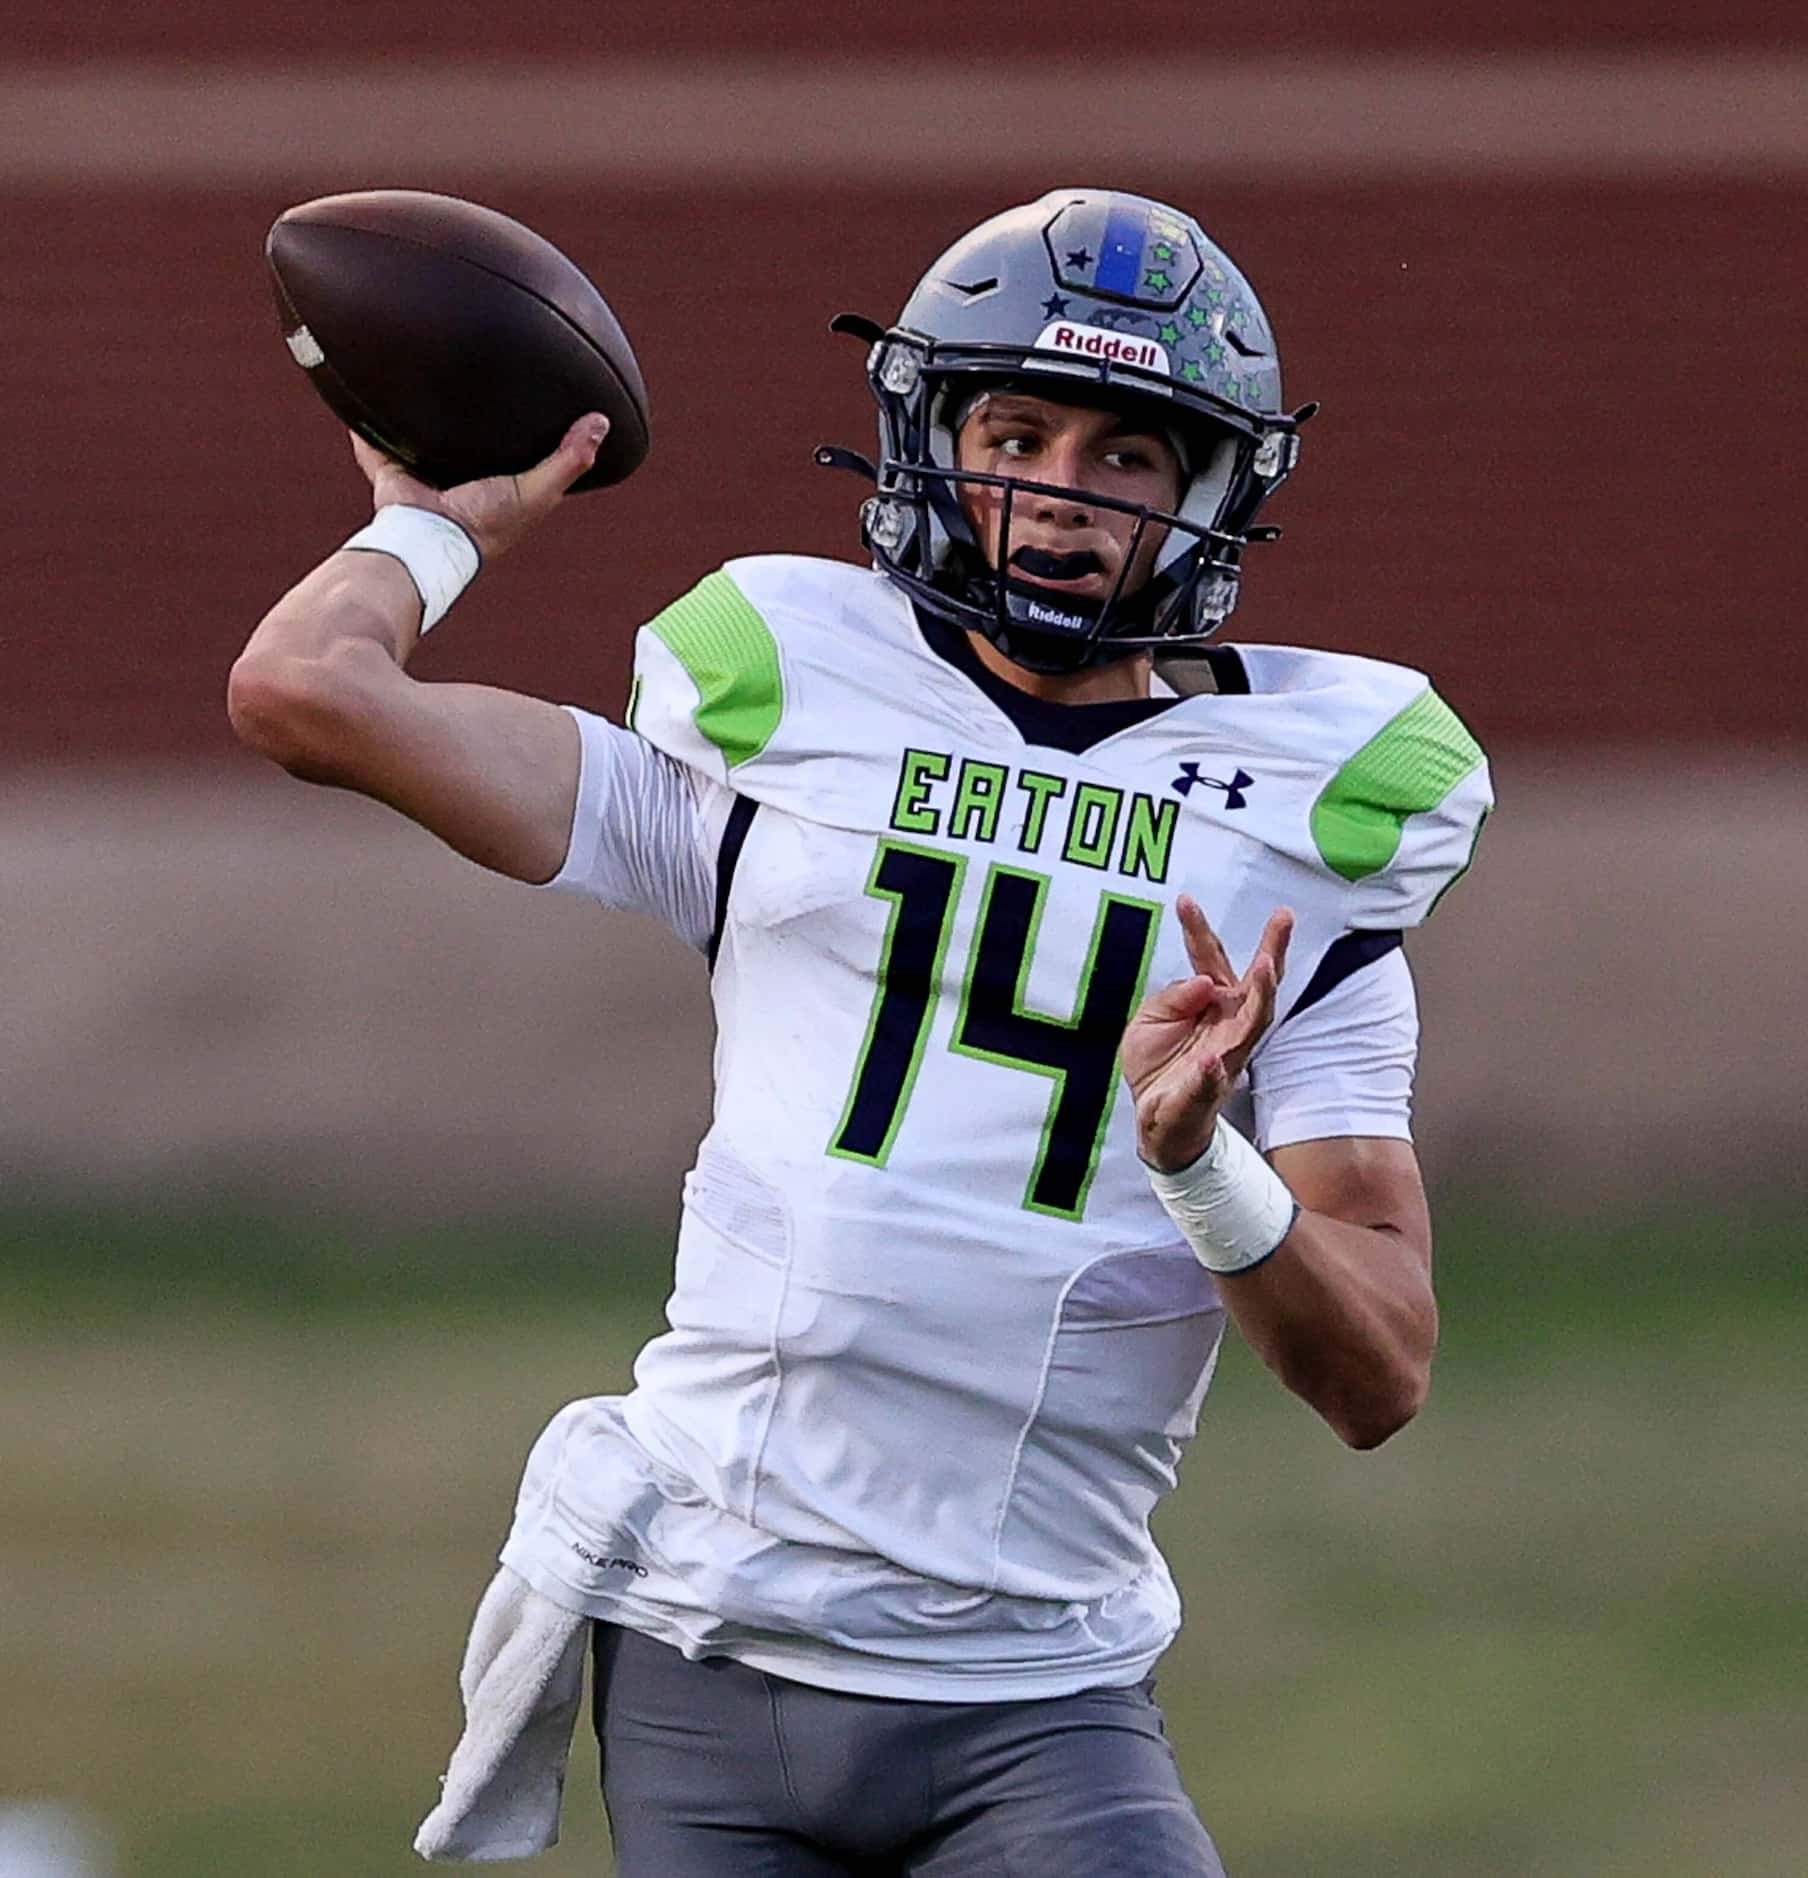 Eaton quarterback Noah Lugo looks to make a pass against Hebron during the first half of a...